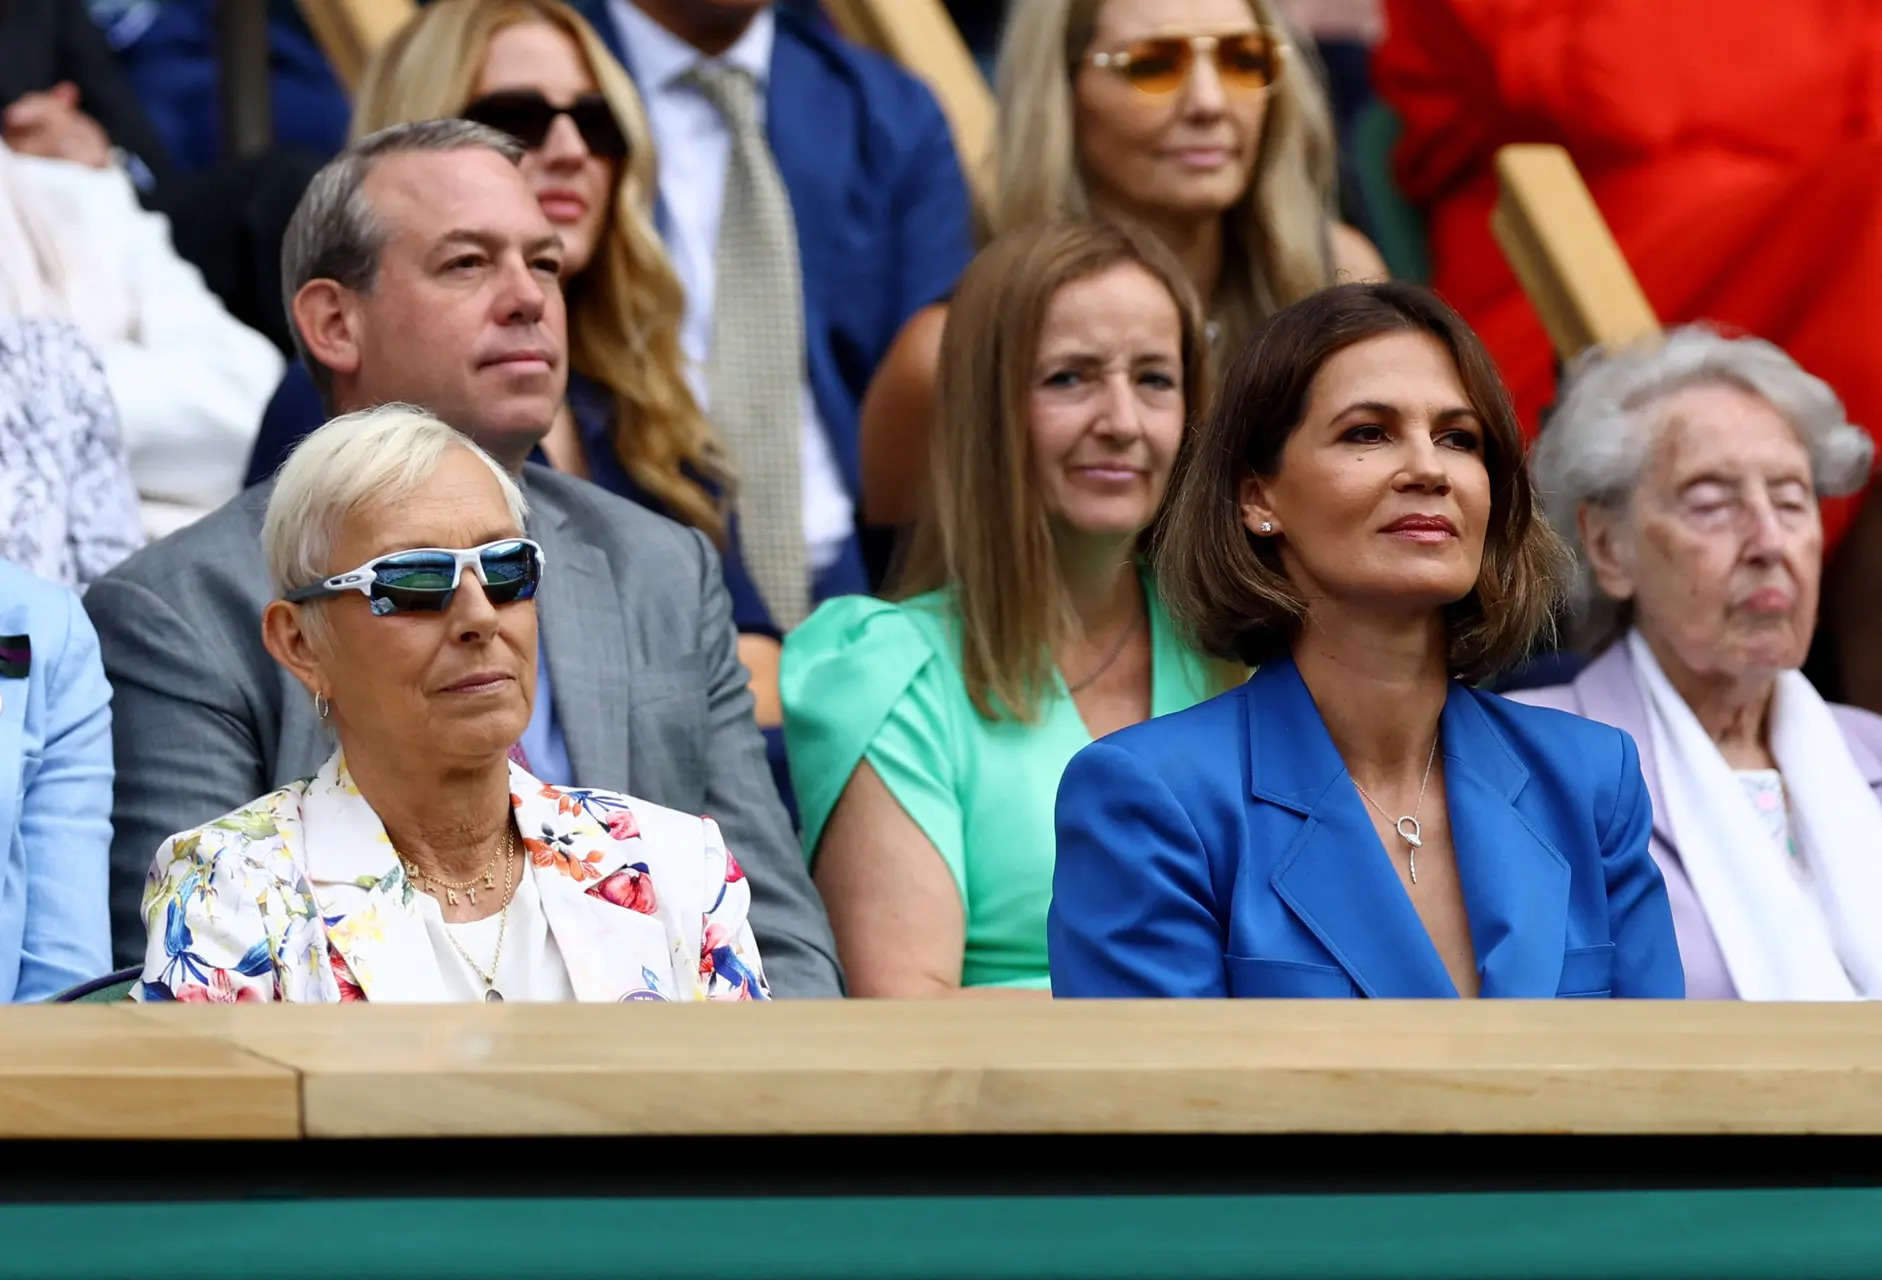 Julia Lemigova and Martina Navratilova: Game, set, match; Here’s all about their marriage, challenges & more 